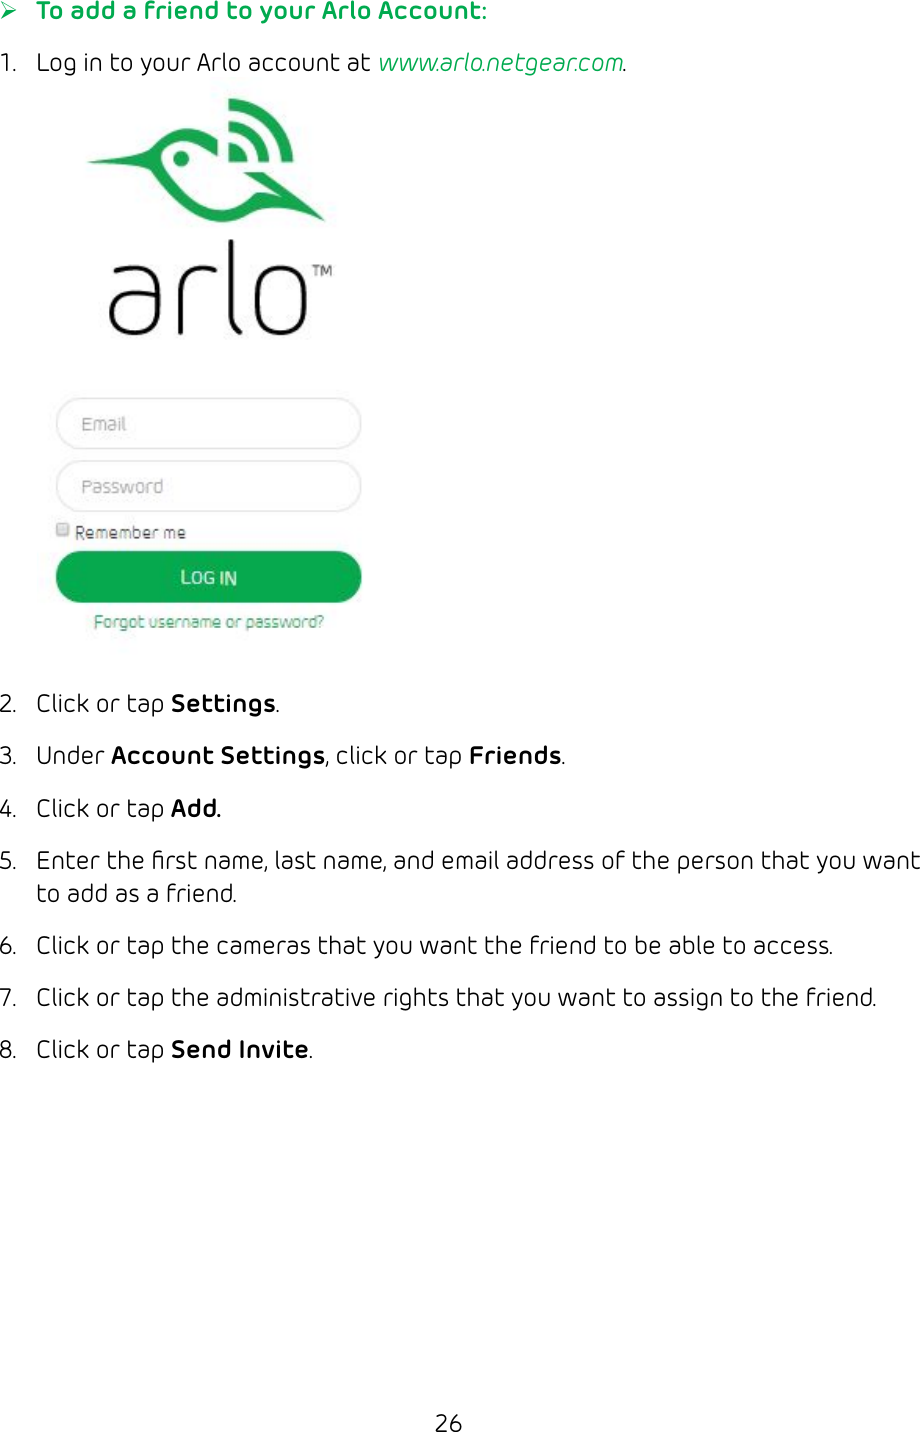 26 ¾To add a friend to your Arlo Account:1.  Log in to your Arlo account at www.arlo.netgear.com.2.  Click or tap Settings.3.  Under Account Settings, click or tap Friends.4.  Click or tap Add.5.  Enter the ﬁrst name, last name, and email address of the person that you want to add as a friend.6.  Click or tap the cameras that you want the friend to be able to access.7.  Click or tap the administrative rights that you want to assign to the friend.8.  Click or tap Send Invite.